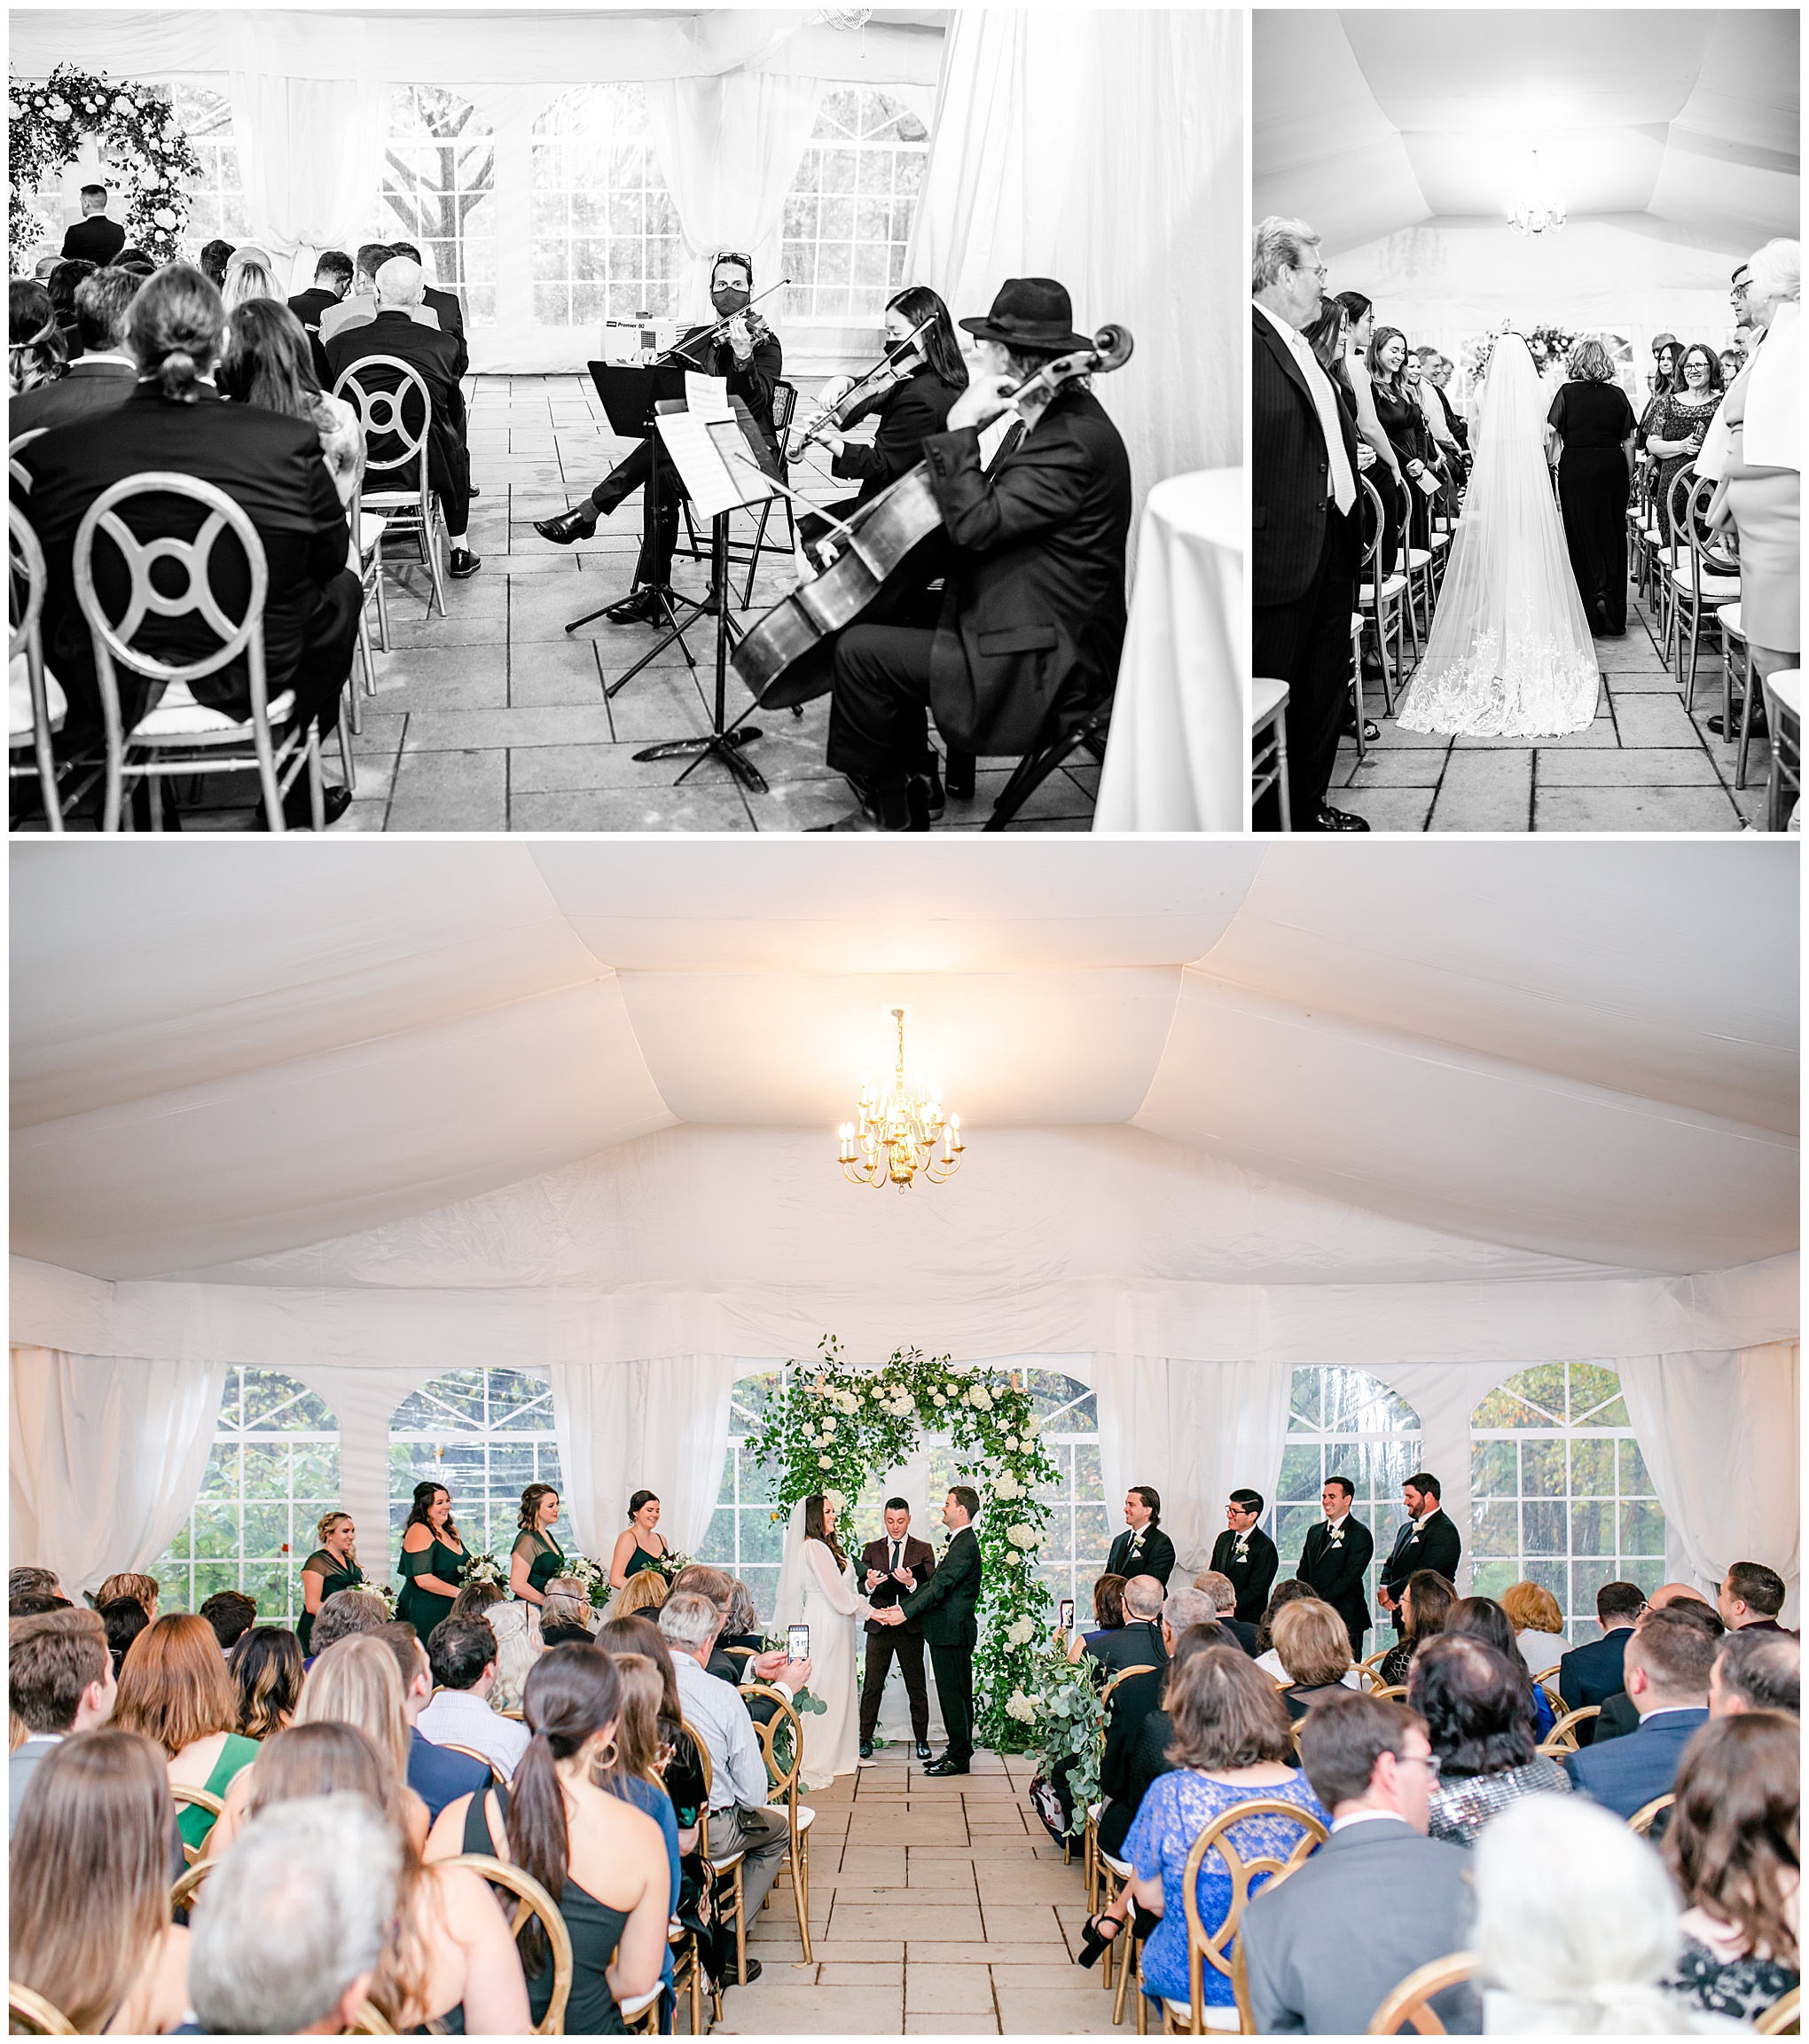 emerald and ivory Woodend Sanctuary wedding, autumn Woodend Sanctuary wedding, rainy day wedding, Maryland wedding venues, Chevy Chase MD wedding venue, mansion wedding, manor house wedding, indoor wedding, DC wedding venue, DC wedding photographer, Baltimore wedding photographer, Rachel E.H. Photography, emerald and ivory aesthetic, black and white, rock creek band, bride and groom at alter, bride walking down aisle, The Coordinated Collective